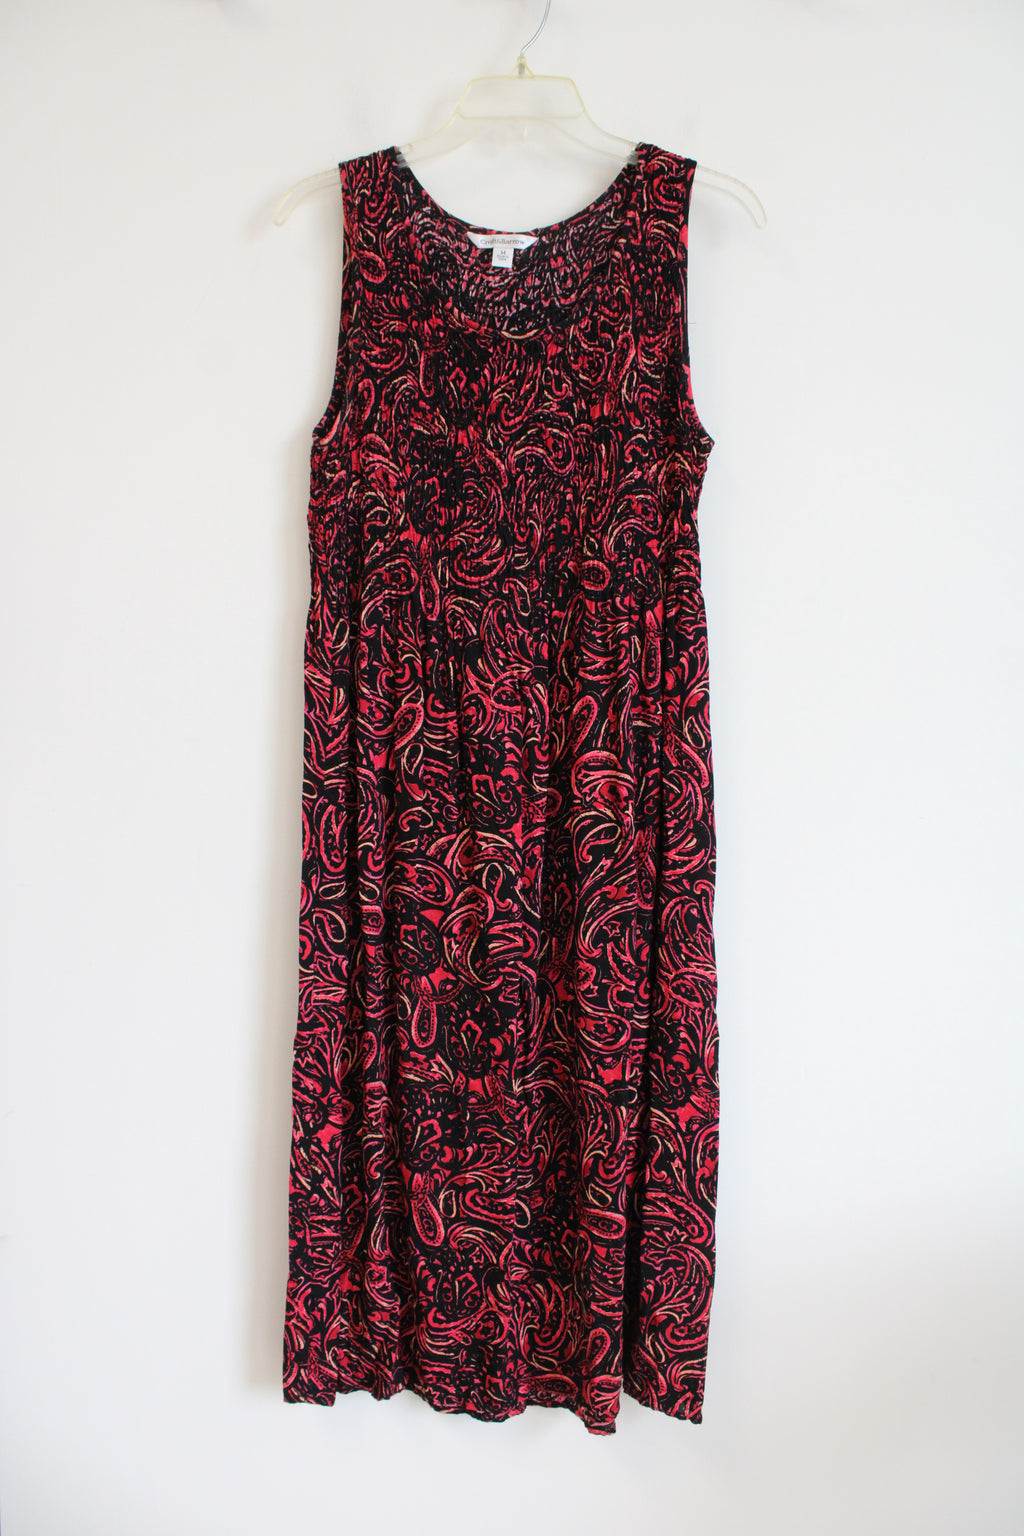 Croft & Barrow Ruched Black & Red Patterned Dress | M